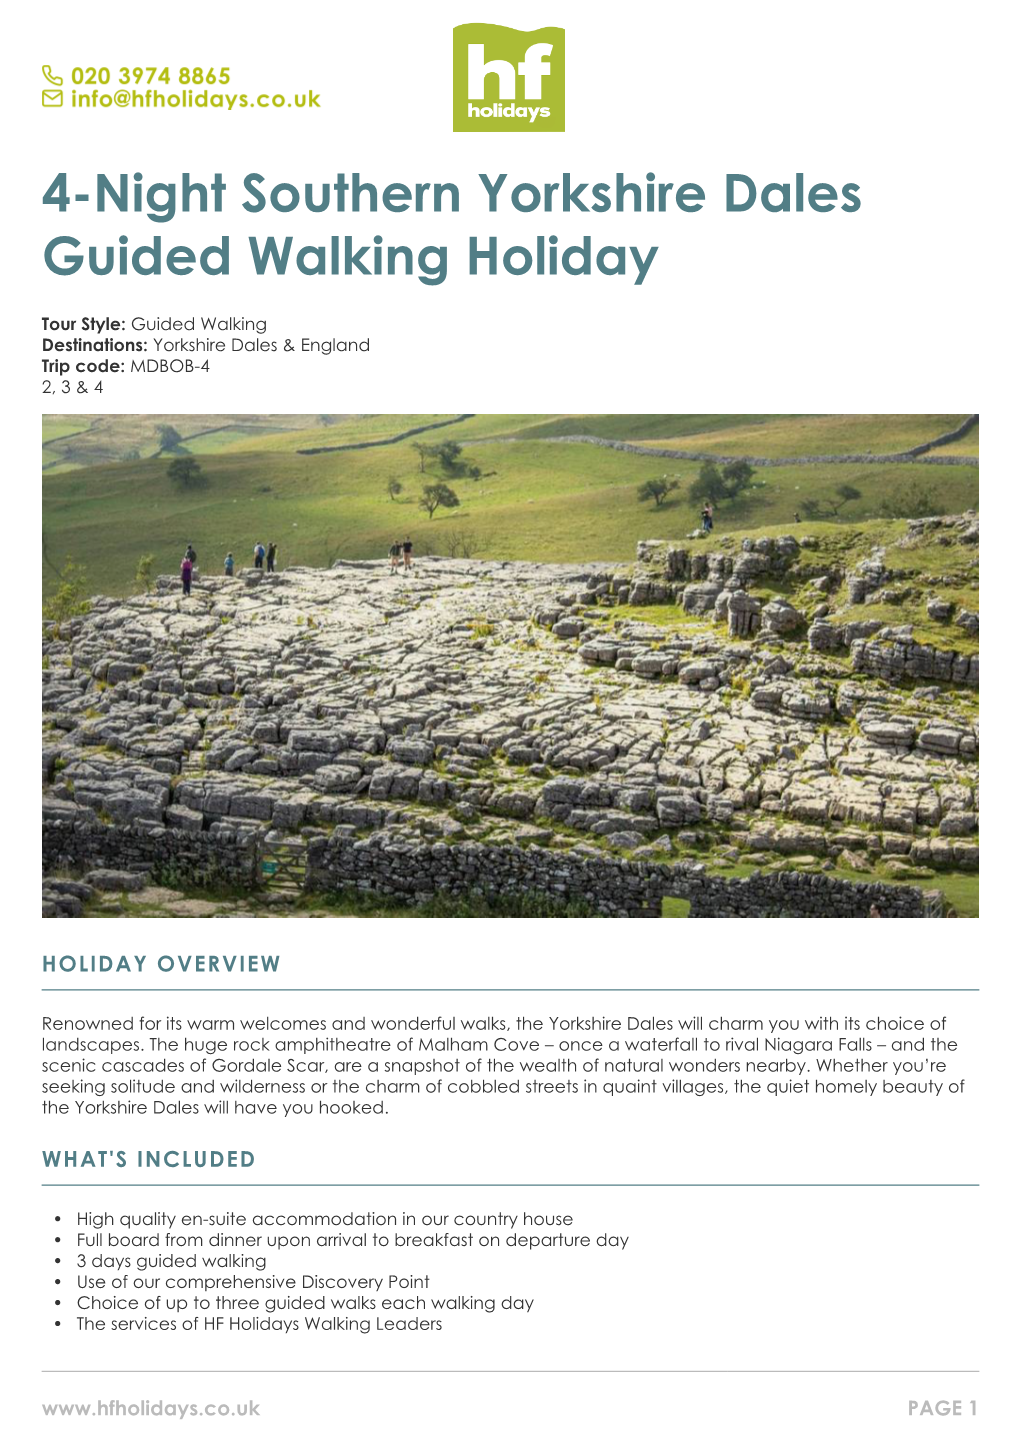 4-Night Southern Yorkshire Dales Guided Walking Holiday